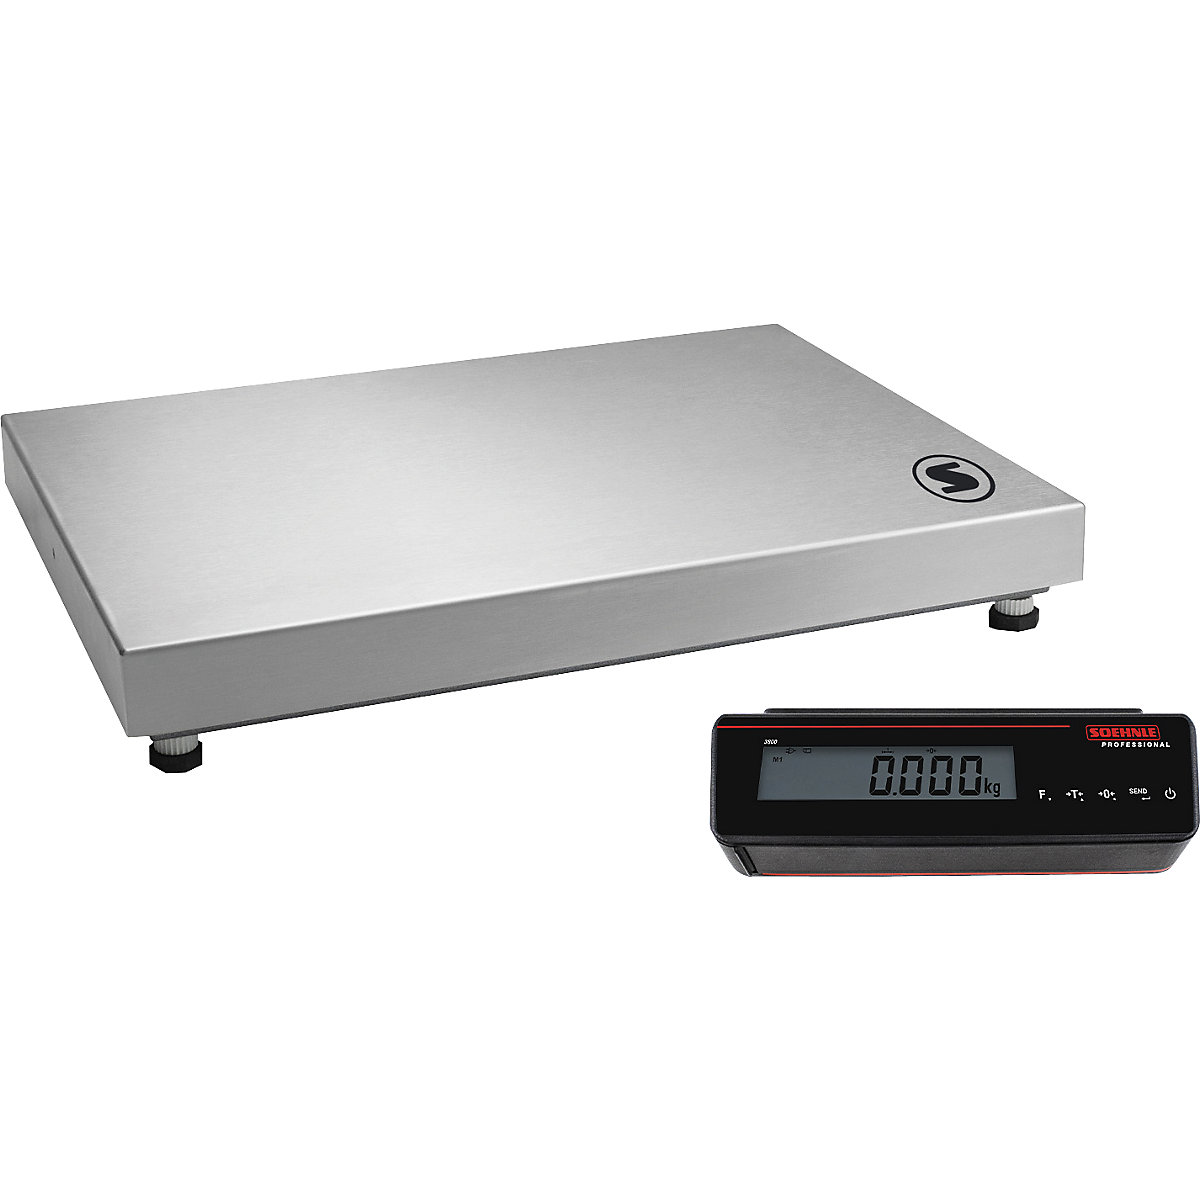 Tabletop scales